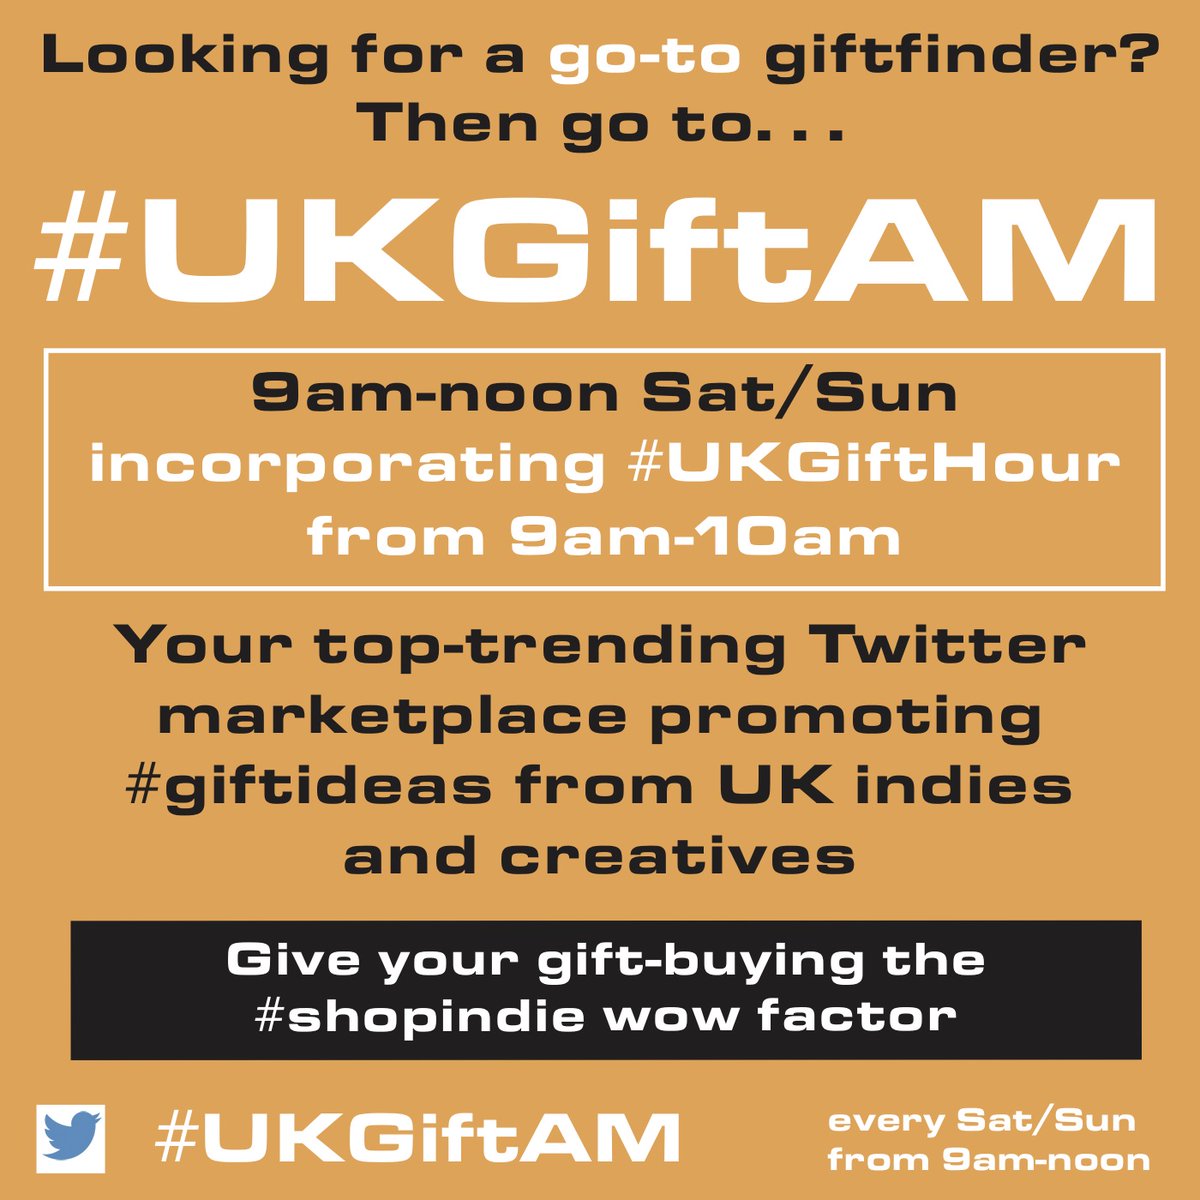 Whether you're shopping or browsing, UK indies & creatives make it a discovery and joy – so please join #UKGiftHour #UKGiftAM for chat, support and original #shopindie #giftideas for all occasions every weekend. There's always a welcome! #shopsmall #supportsmallbusiness